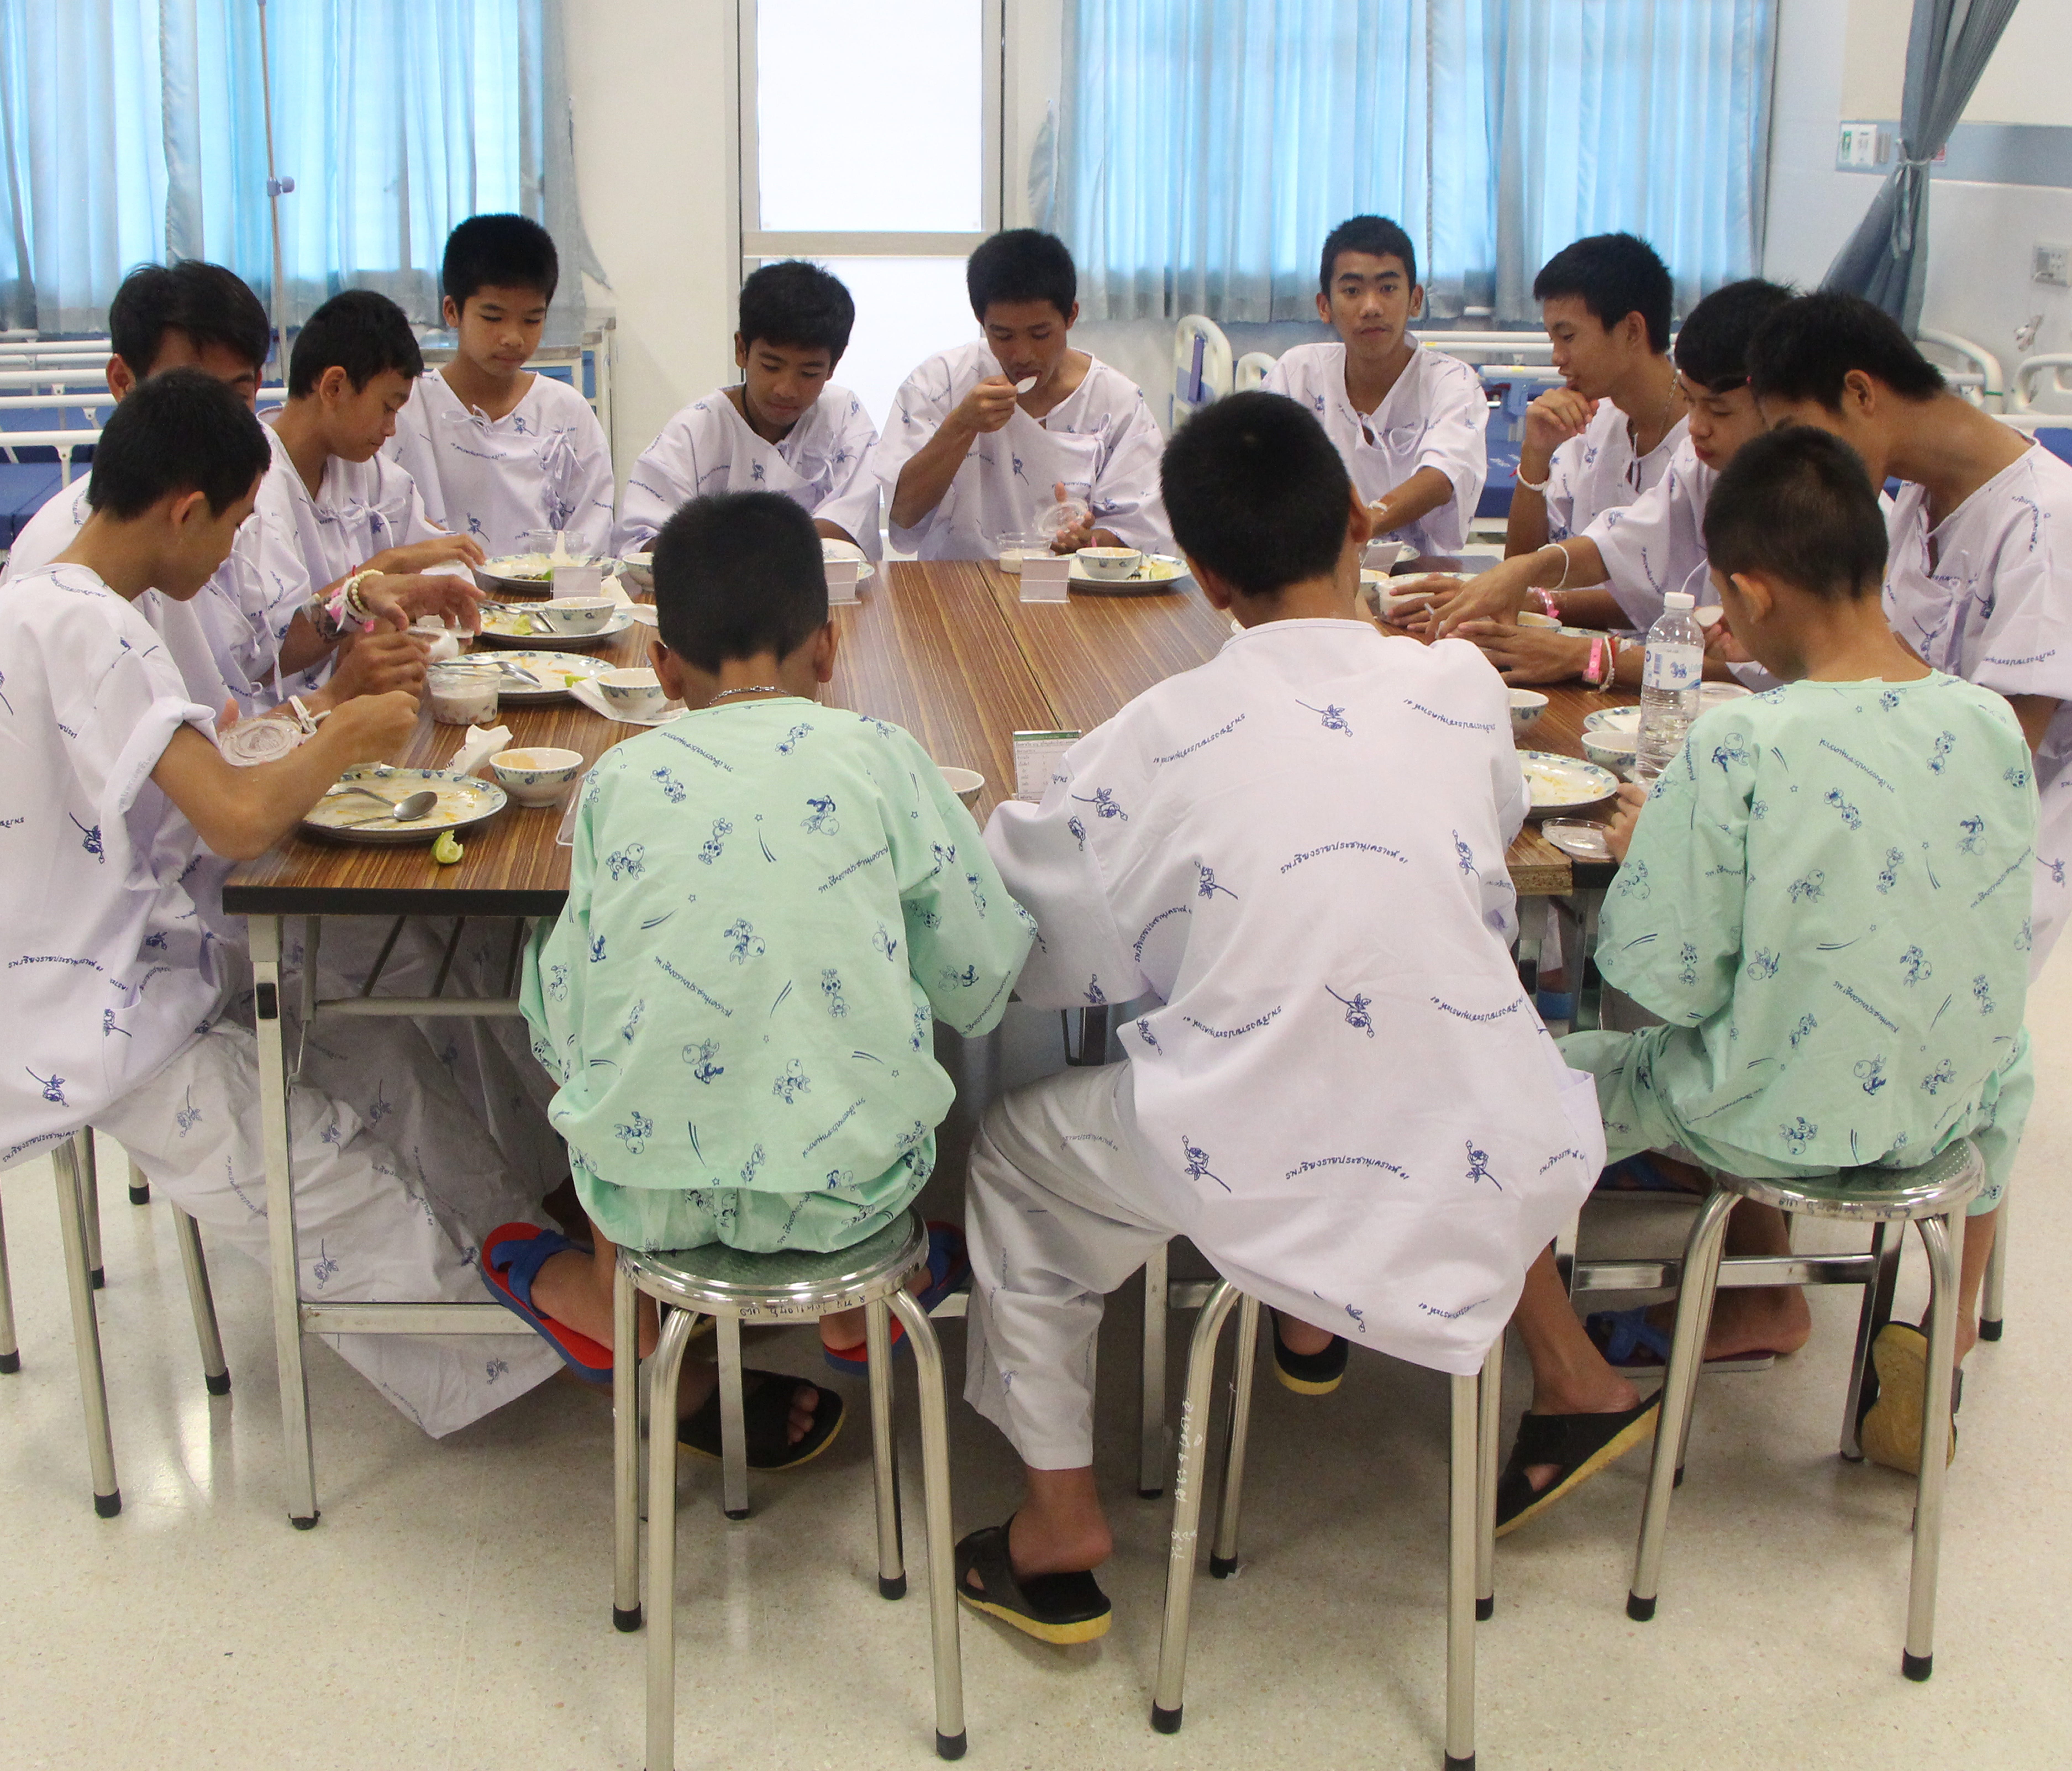 A handout photo made available by the Chiang Rai Prachanukroh Hospital and the Ministry of Public Health shows some of the 13 rescued soccer team members having a meal together in Chiang Rai province, Thailand on July 14.